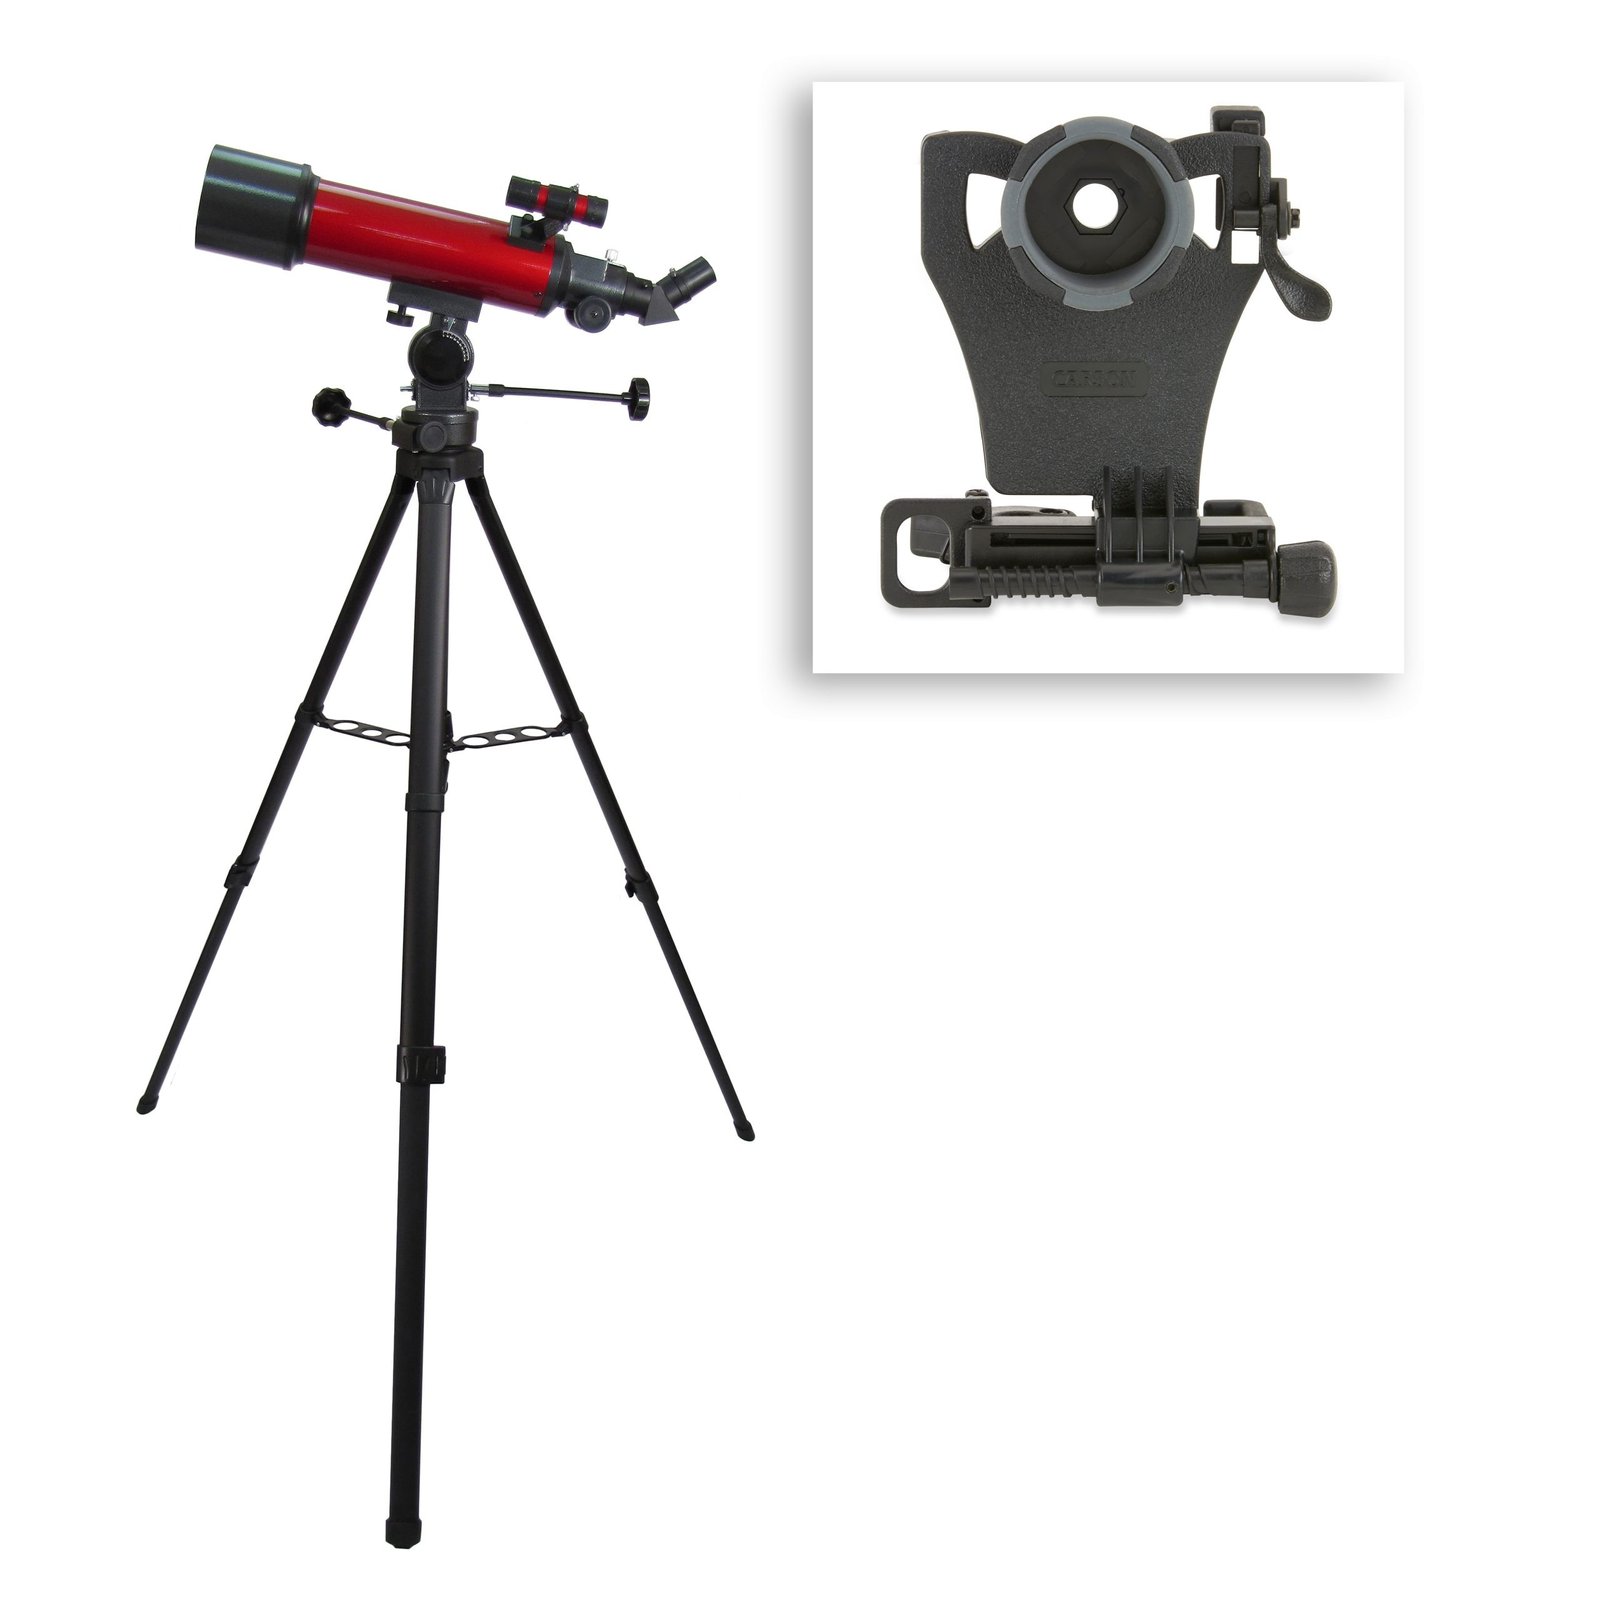 Smartphone Red Digiscoping Telescope, Carson – 25-56x80mm TheRealOptics Adapter Universal Planet Series Refractor